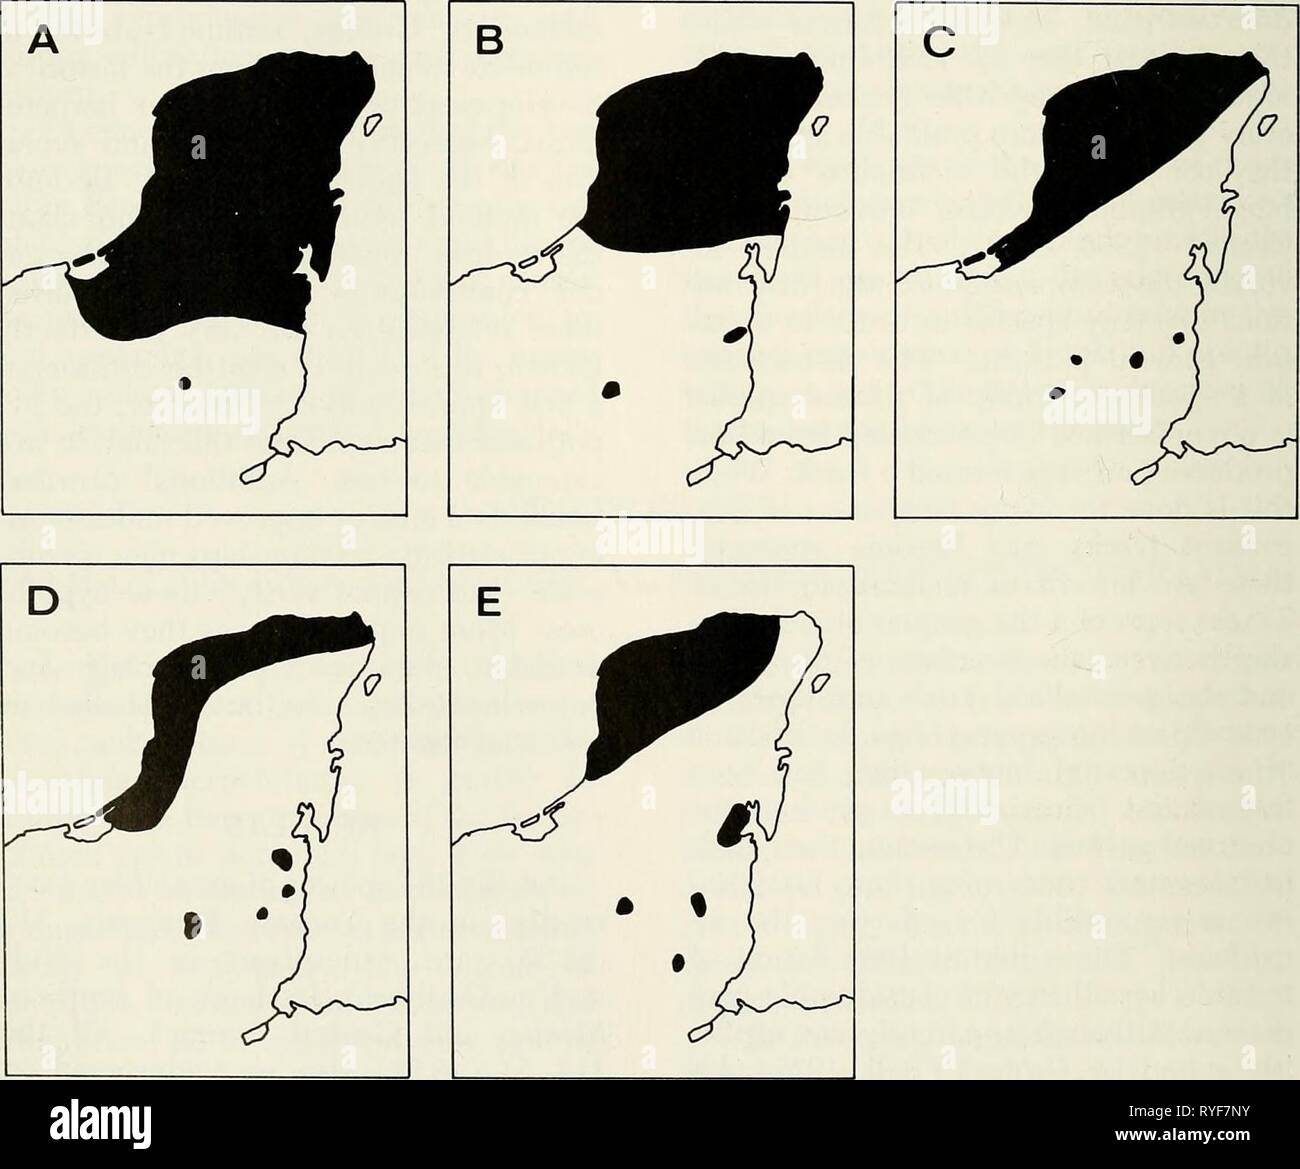 An ecogeographic analysis of the herpetofauna of the Yucatan Peninsula  ecogeographicana00leej Year: 1980  32 MISCELLANEOUS PUBLICATION MUSEUM OF NATURAL HISTORY sula is certainly no surprise; indeed, it is the absence of some such species (e.g. Coniophanes picevittis) that is note- worthy. The origin of this portion of the peninsular herpetofauna thus involves the larger question of the origins of the Middle American herpetofauna, a sub- ject treated at length by Savage (1966). Primarily on the basis of modem distri- bution patterns. Savage (1966) charac- terized the genera of Middle American Stock Photo